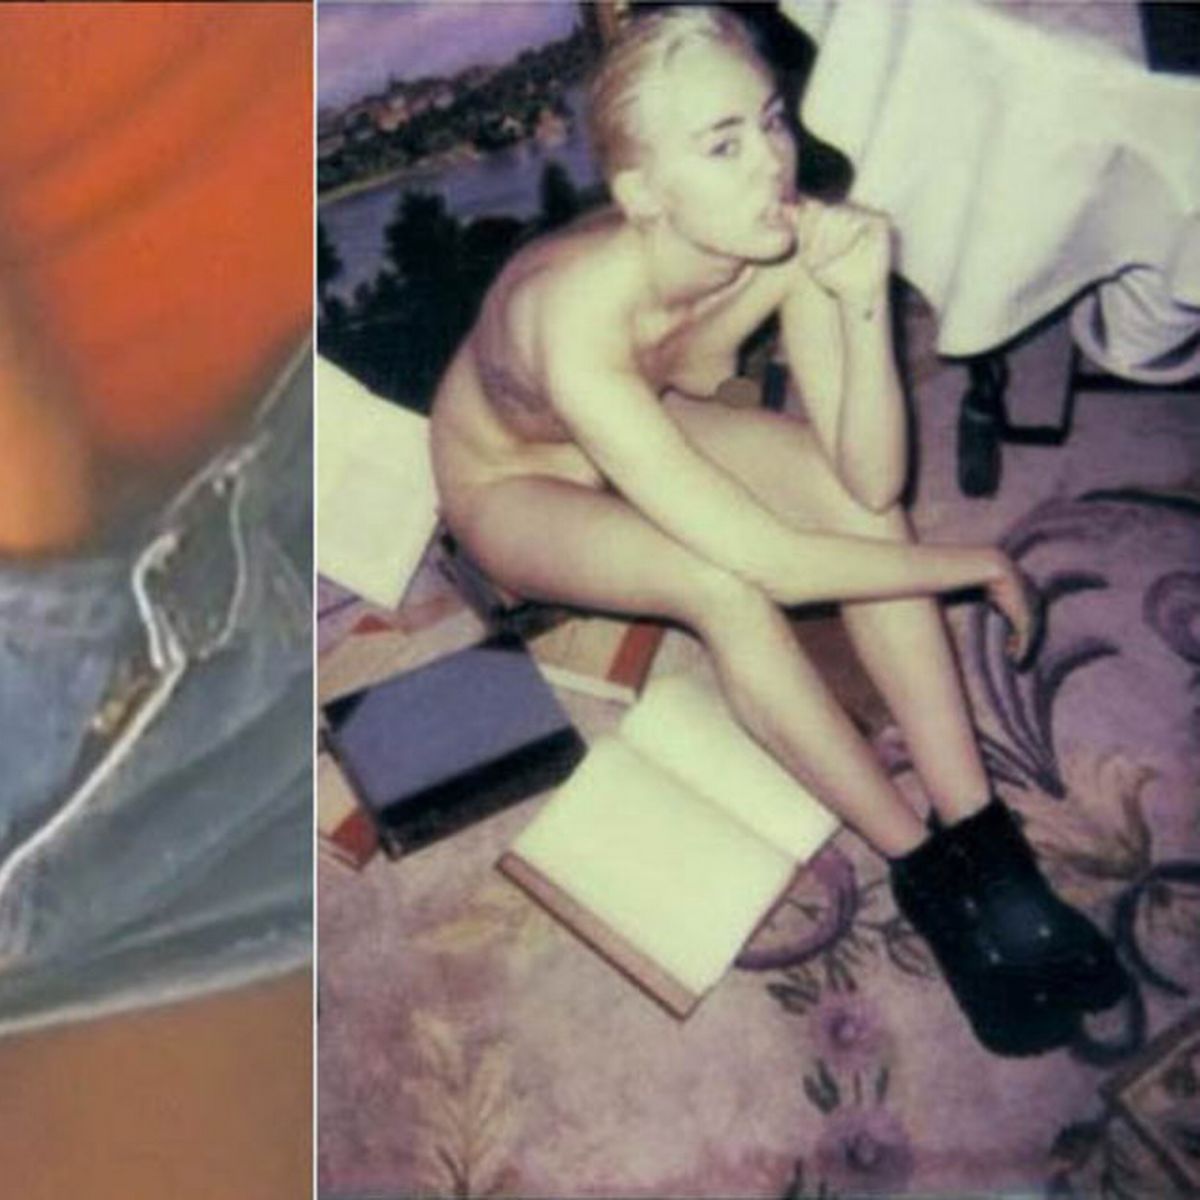 ann ewell share pictures of miley cyrus having sex photos